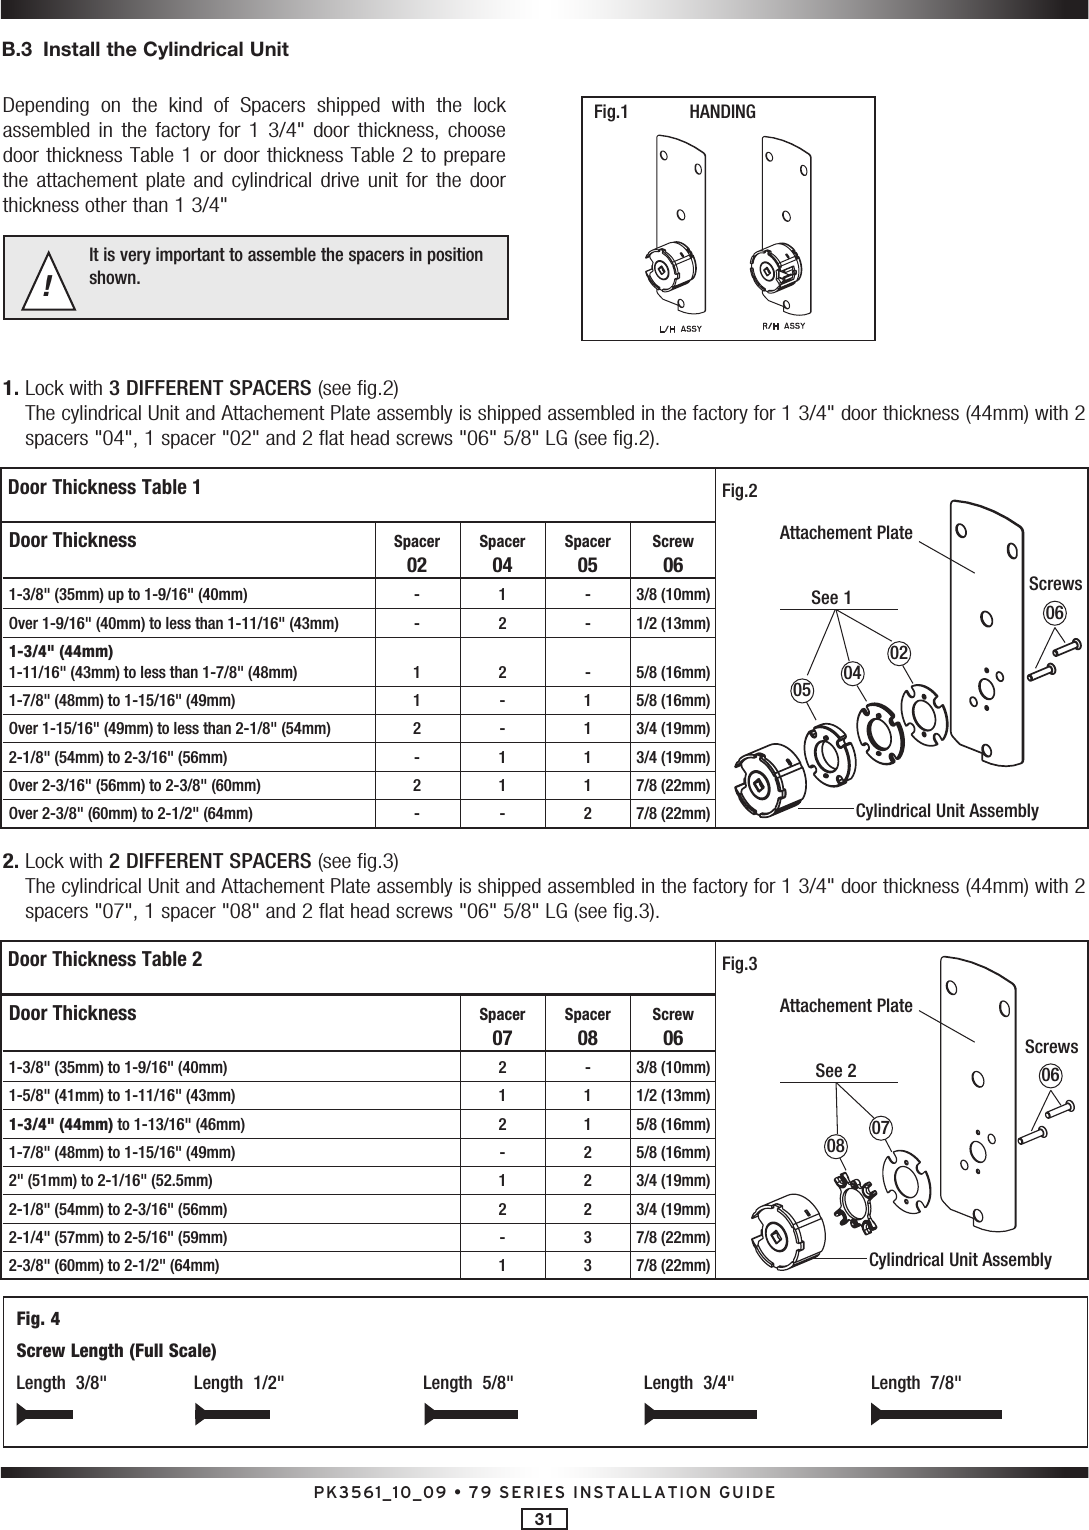 PK3561_10_09 • 79 SERIES INSTALLATION GUIDE31B.3  Install the Cylindrical UnitDepending  on  the  kind  of  Spacers  shipped  with  the  lock assembled  in  the  factory  for  1  3/4&quot;  door  thickness,  choose door thickness Table 1 or door thickness Table 2 to prepare the  attachement  plate  and  cylindrical  drive  unit  for  the  door thickness other than 1 3/4&quot; It is very important to assemble the spacers in position shown.!HANDING1.  Lock with 3 DIFFERENT SPACERS (see fig.2)The cylindrical Unit and Attachement Plate assembly is shipped assembled in the factory for 1 3/4&quot; door thickness (44mm) with 2 spacers &quot;04&quot;, 1 spacer &quot;02&quot; and 2 flat head screws &quot;06&quot; 5/8&quot; LG (see fig.2).2.  Lock with 2 DIFFERENT SPACERS (see fig.3)The cylindrical Unit and Attachement Plate assembly is shipped assembled in the factory for 1 3/4&quot; door thickness (44mm) with 2 spacers &quot;07&quot;, 1 spacer &quot;08&quot; and 2 flat head screws &quot;06&quot; 5/8&quot; LG (see fig.3).Fig. 4Screw Length (Full Scale)Length  3/8&quot;  Length  1/2&quot;  Length  5/8&quot;  Length  3/4&quot;  Length  7/8&quot; Door Thickness  Spacer Spacer Spacer Screw   02  04  05  06 1-3/8&quot; (35mm) up to 1-9/16&quot; (40mm)  -  1  -  3/8 (10mm)  Over 1-9/16&quot; (40mm) to less than 1-11/16&quot; (43mm)  -  2  -  1/2 (13mm) 1-3/4&quot; (44mm)  1-11/16&quot; (43mm) to less than 1-7/8&quot; (48mm)  1  2  -  5/8 (16mm)  1-7/8&quot; (48mm) to 1-15/16&quot; (49mm)  1  -  1  5/8 (16mm)  Over 1-15/16&quot; (49mm) to less than 2-1/8&quot; (54mm)  2  -  1  3/4 (19mm)  2-1/8&quot; (54mm) to 2-3/16&quot; (56mm)  -  1  1  3/4 (19mm)  Over 2-3/16&quot; (56mm) to 2-3/8&quot; (60mm)  2  1  1  7/8 (22mm)  Over 2-3/8&quot; (60mm) to 2-1/2&quot; (64mm)  -  -  2  7/8 (22mm) Door Thickness    Spacer Spacer Screw     07  08  06 1-3/8&quot; (35mm) to 1-9/16&quot; (40mm)    2  -  3/8 (10mm)  1-5/8&quot; (41mm) to 1-11/16&quot; (43mm)    1  1  1/2 (13mm) 1-3/4&quot; (44mm) to 1-13/16&quot; (46mm)    2  1  5/8 (16mm)  1-7/8&quot; (48mm) to 1-15/16&quot; (49mm)    -  2  5/8 (16mm)  2&quot; (51mm) to 2-1/16&quot; (52.5mm)    1  2  3/4 (19mm)  2-1/8&quot; (54mm) to 2-3/16&quot; (56mm)    2  2  3/4 (19mm)  2-1/4&quot; (57mm) to 2-5/16&quot; (59mm)    -  3  7/8 (22mm)  2-3/8&quot; (60mm) to 2-1/2&quot; (64mm)    1  3  7/8 (22mm)Door Thickness Table 1Door Thickness Table 2See 1See 2ScrewsScrewsAttachement PlateAttachement PlateCylindrical Unit AssemblyCylindrical Unit AssemblyFig.2 Fig.3 Fig.1 02070408050606